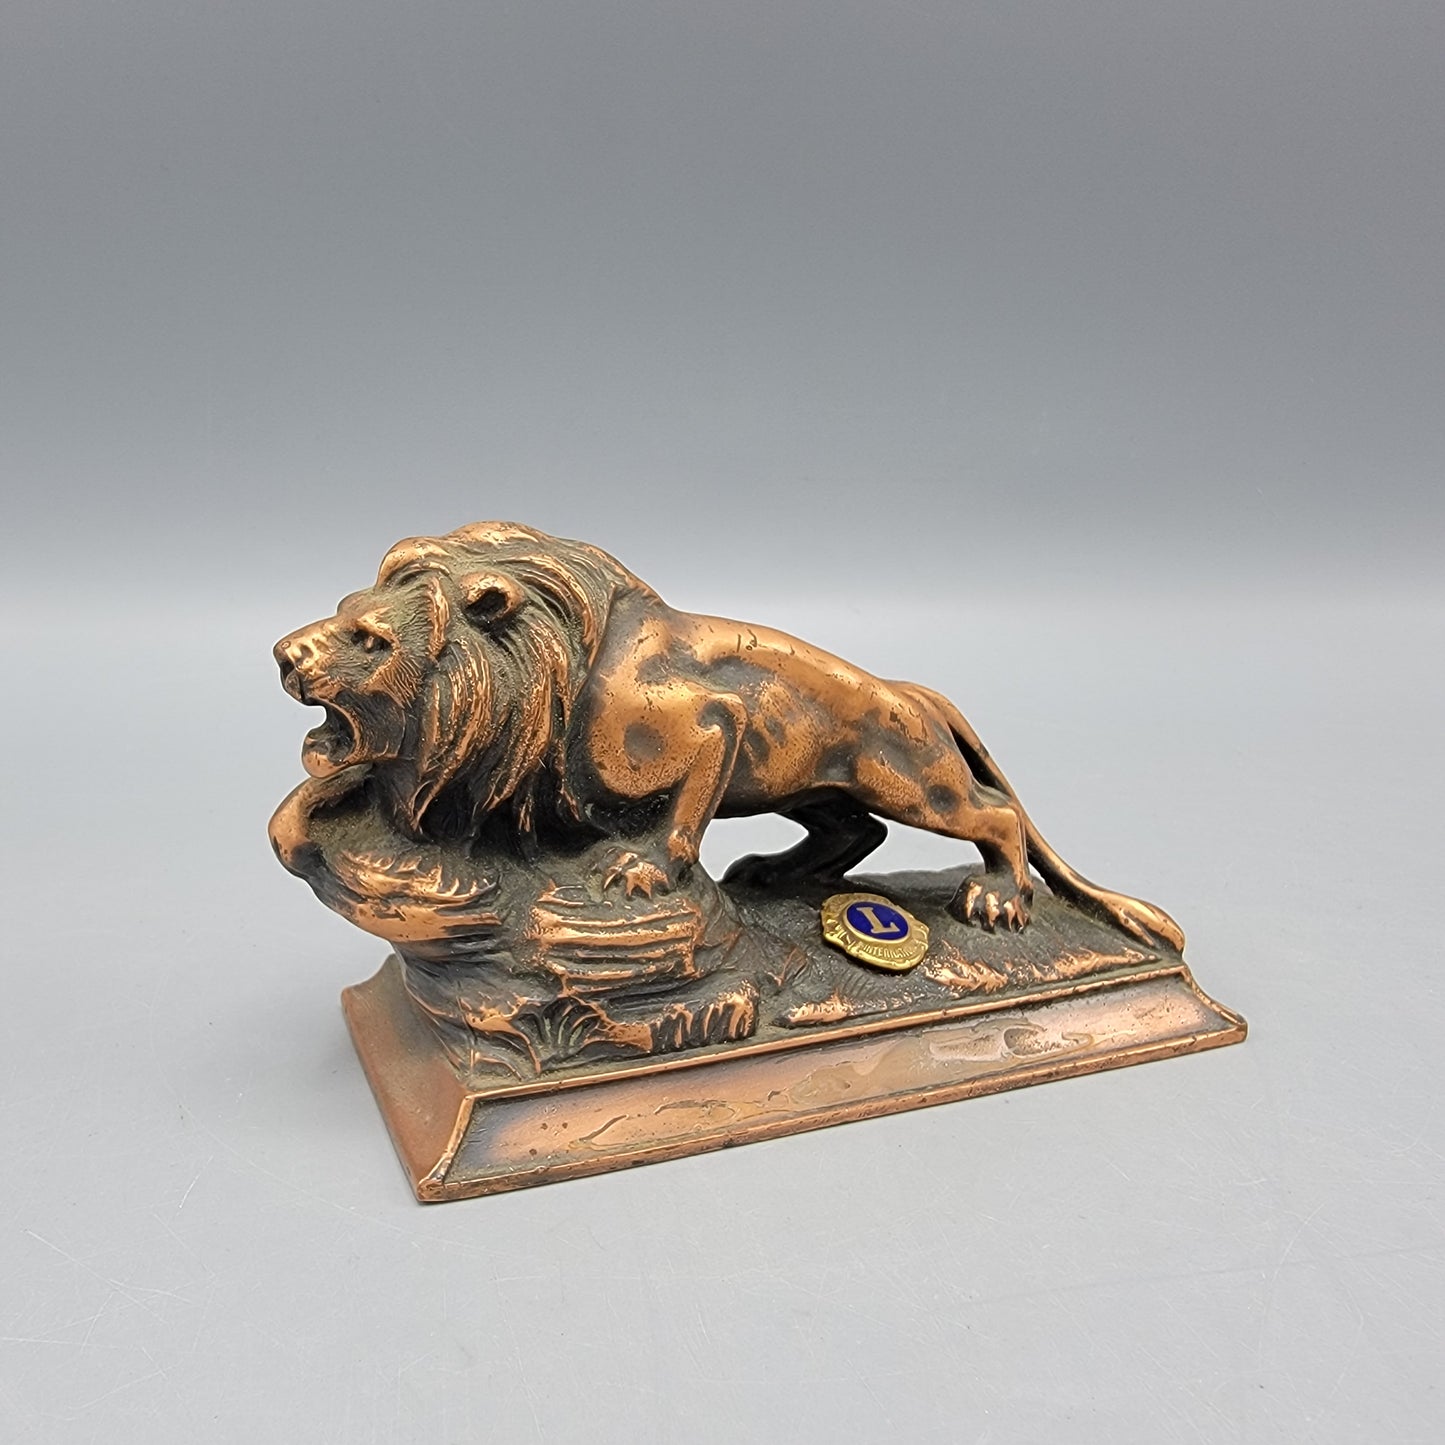 Vintage Metal Figure of Lion with Lions Club Pin